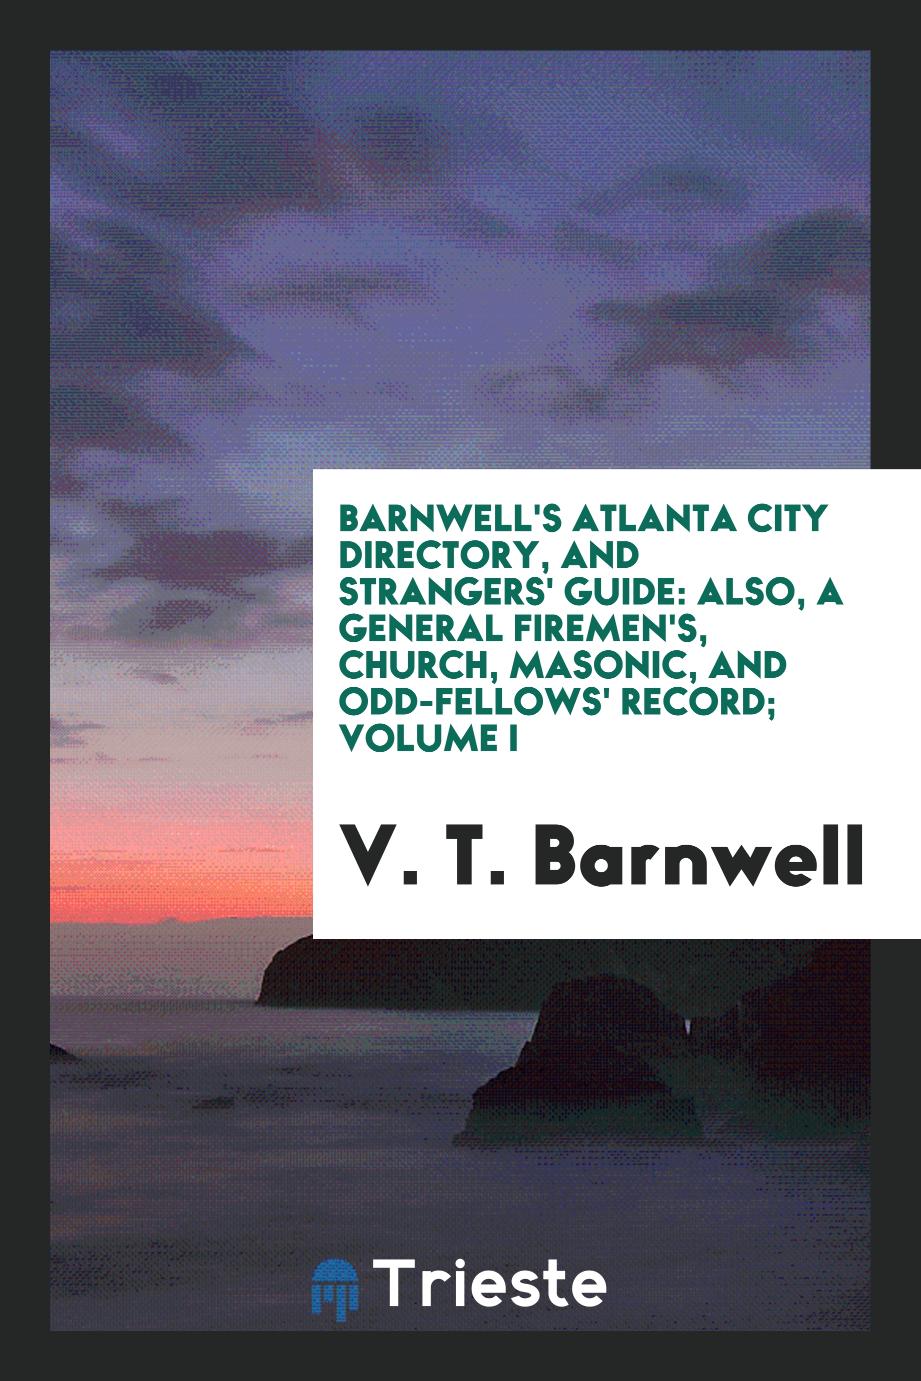 Barnwell's Atlanta City Directory, and Strangers' Guide: Also, a General Firemen's, Church, Masonic, and Odd-fellows' Record; Volume I